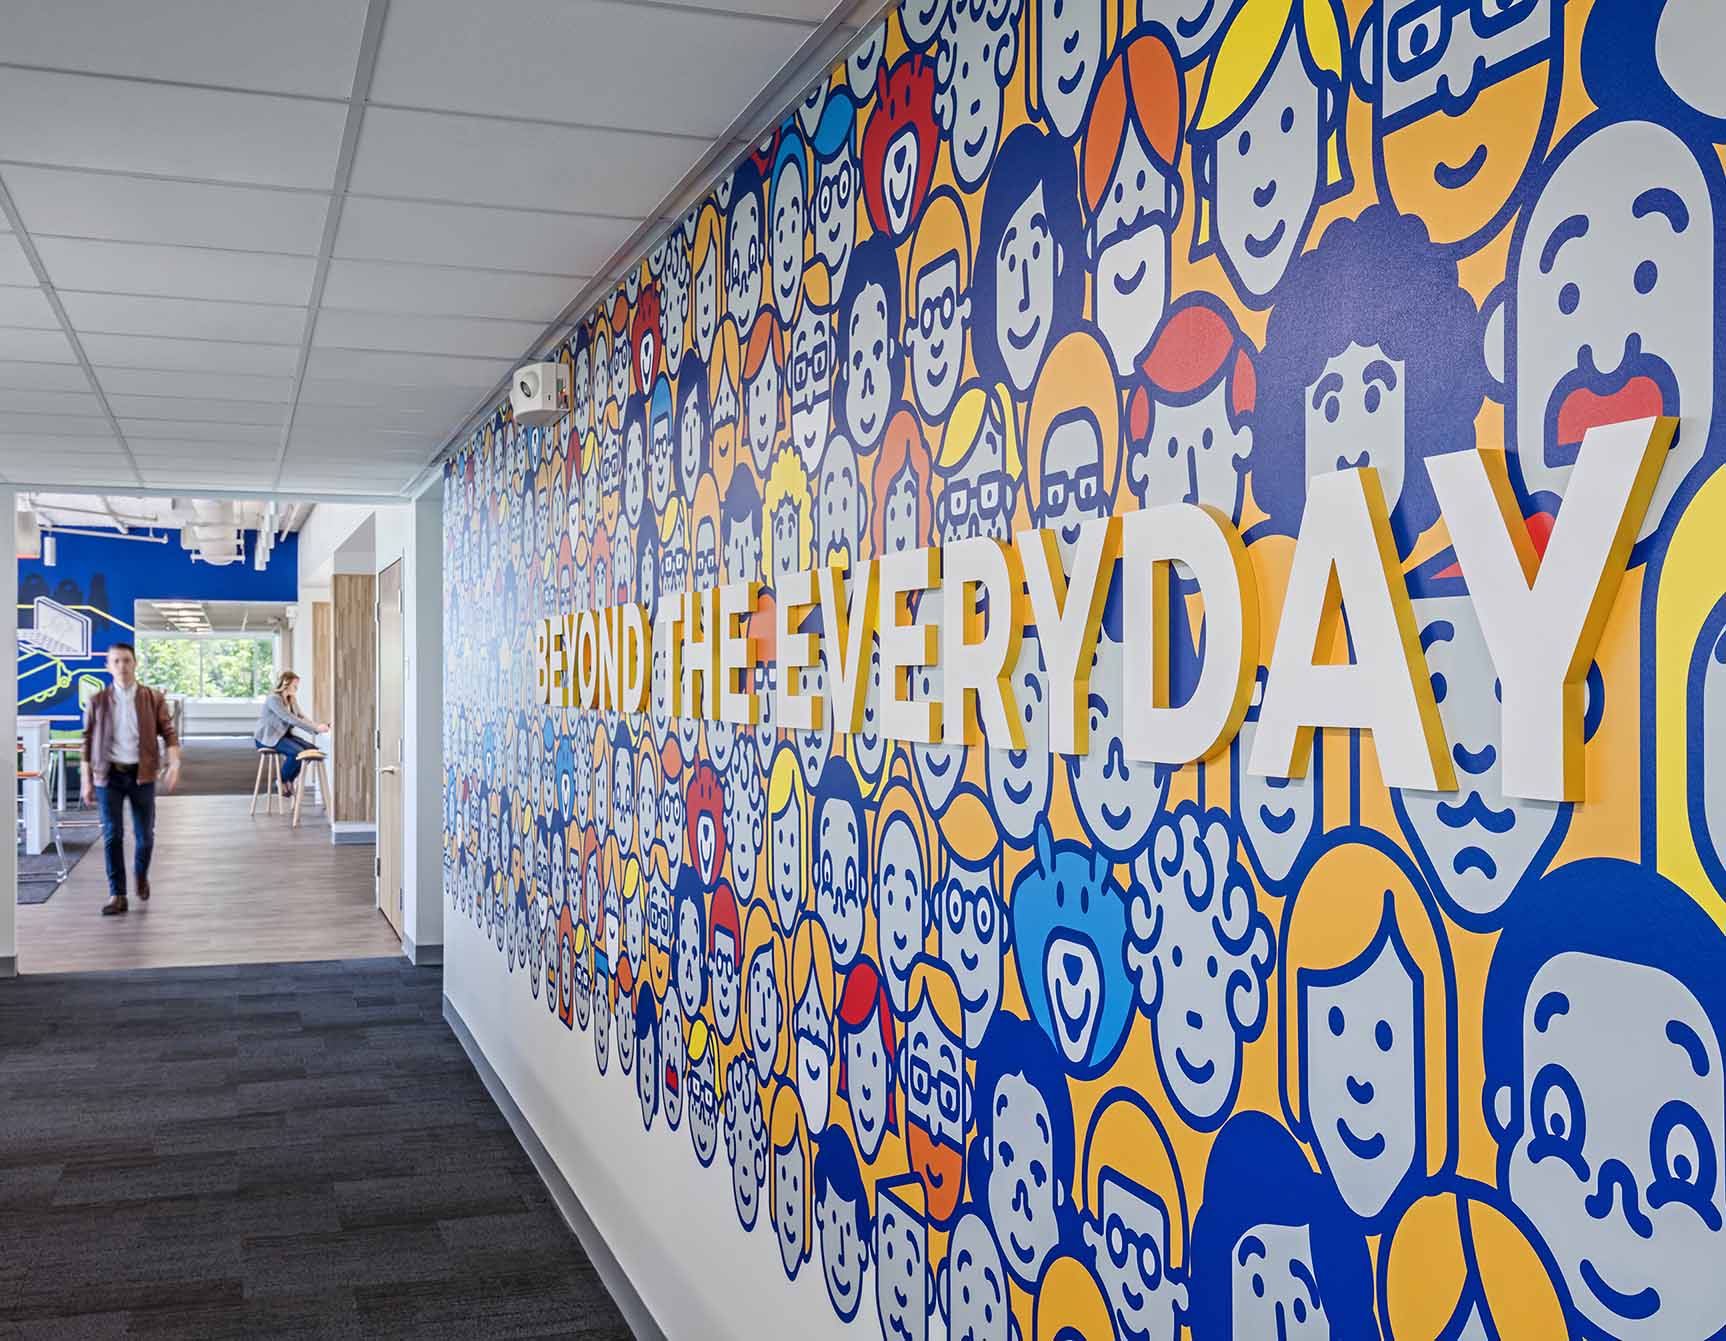 Mural that reads "Beyond the Everyday" at P&G Family Care office